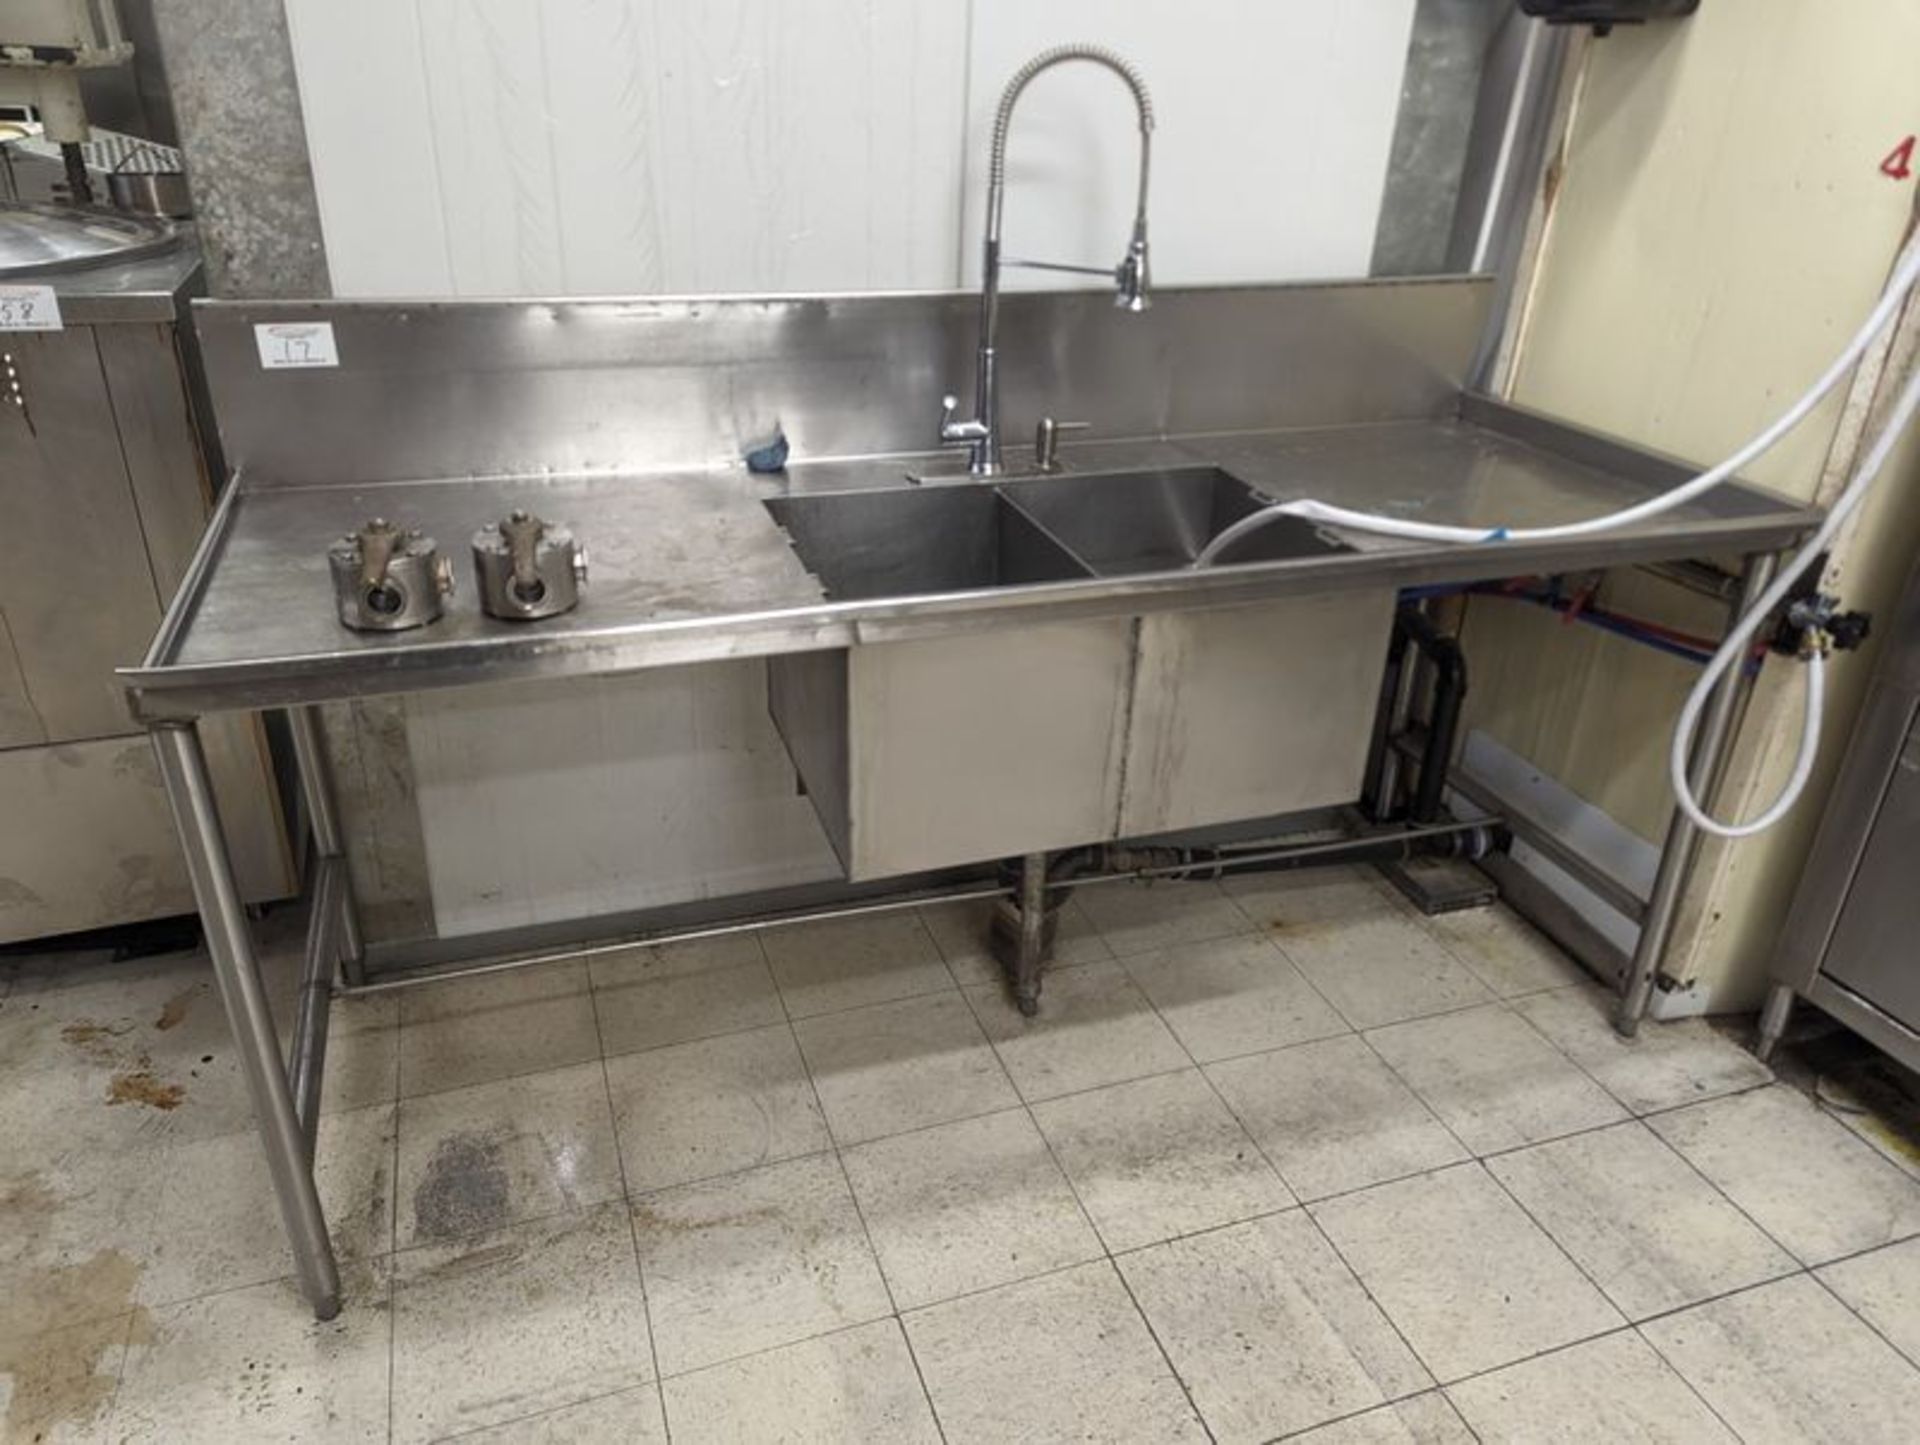 2 Compartment Stainless Steel Sink with 4 Taps